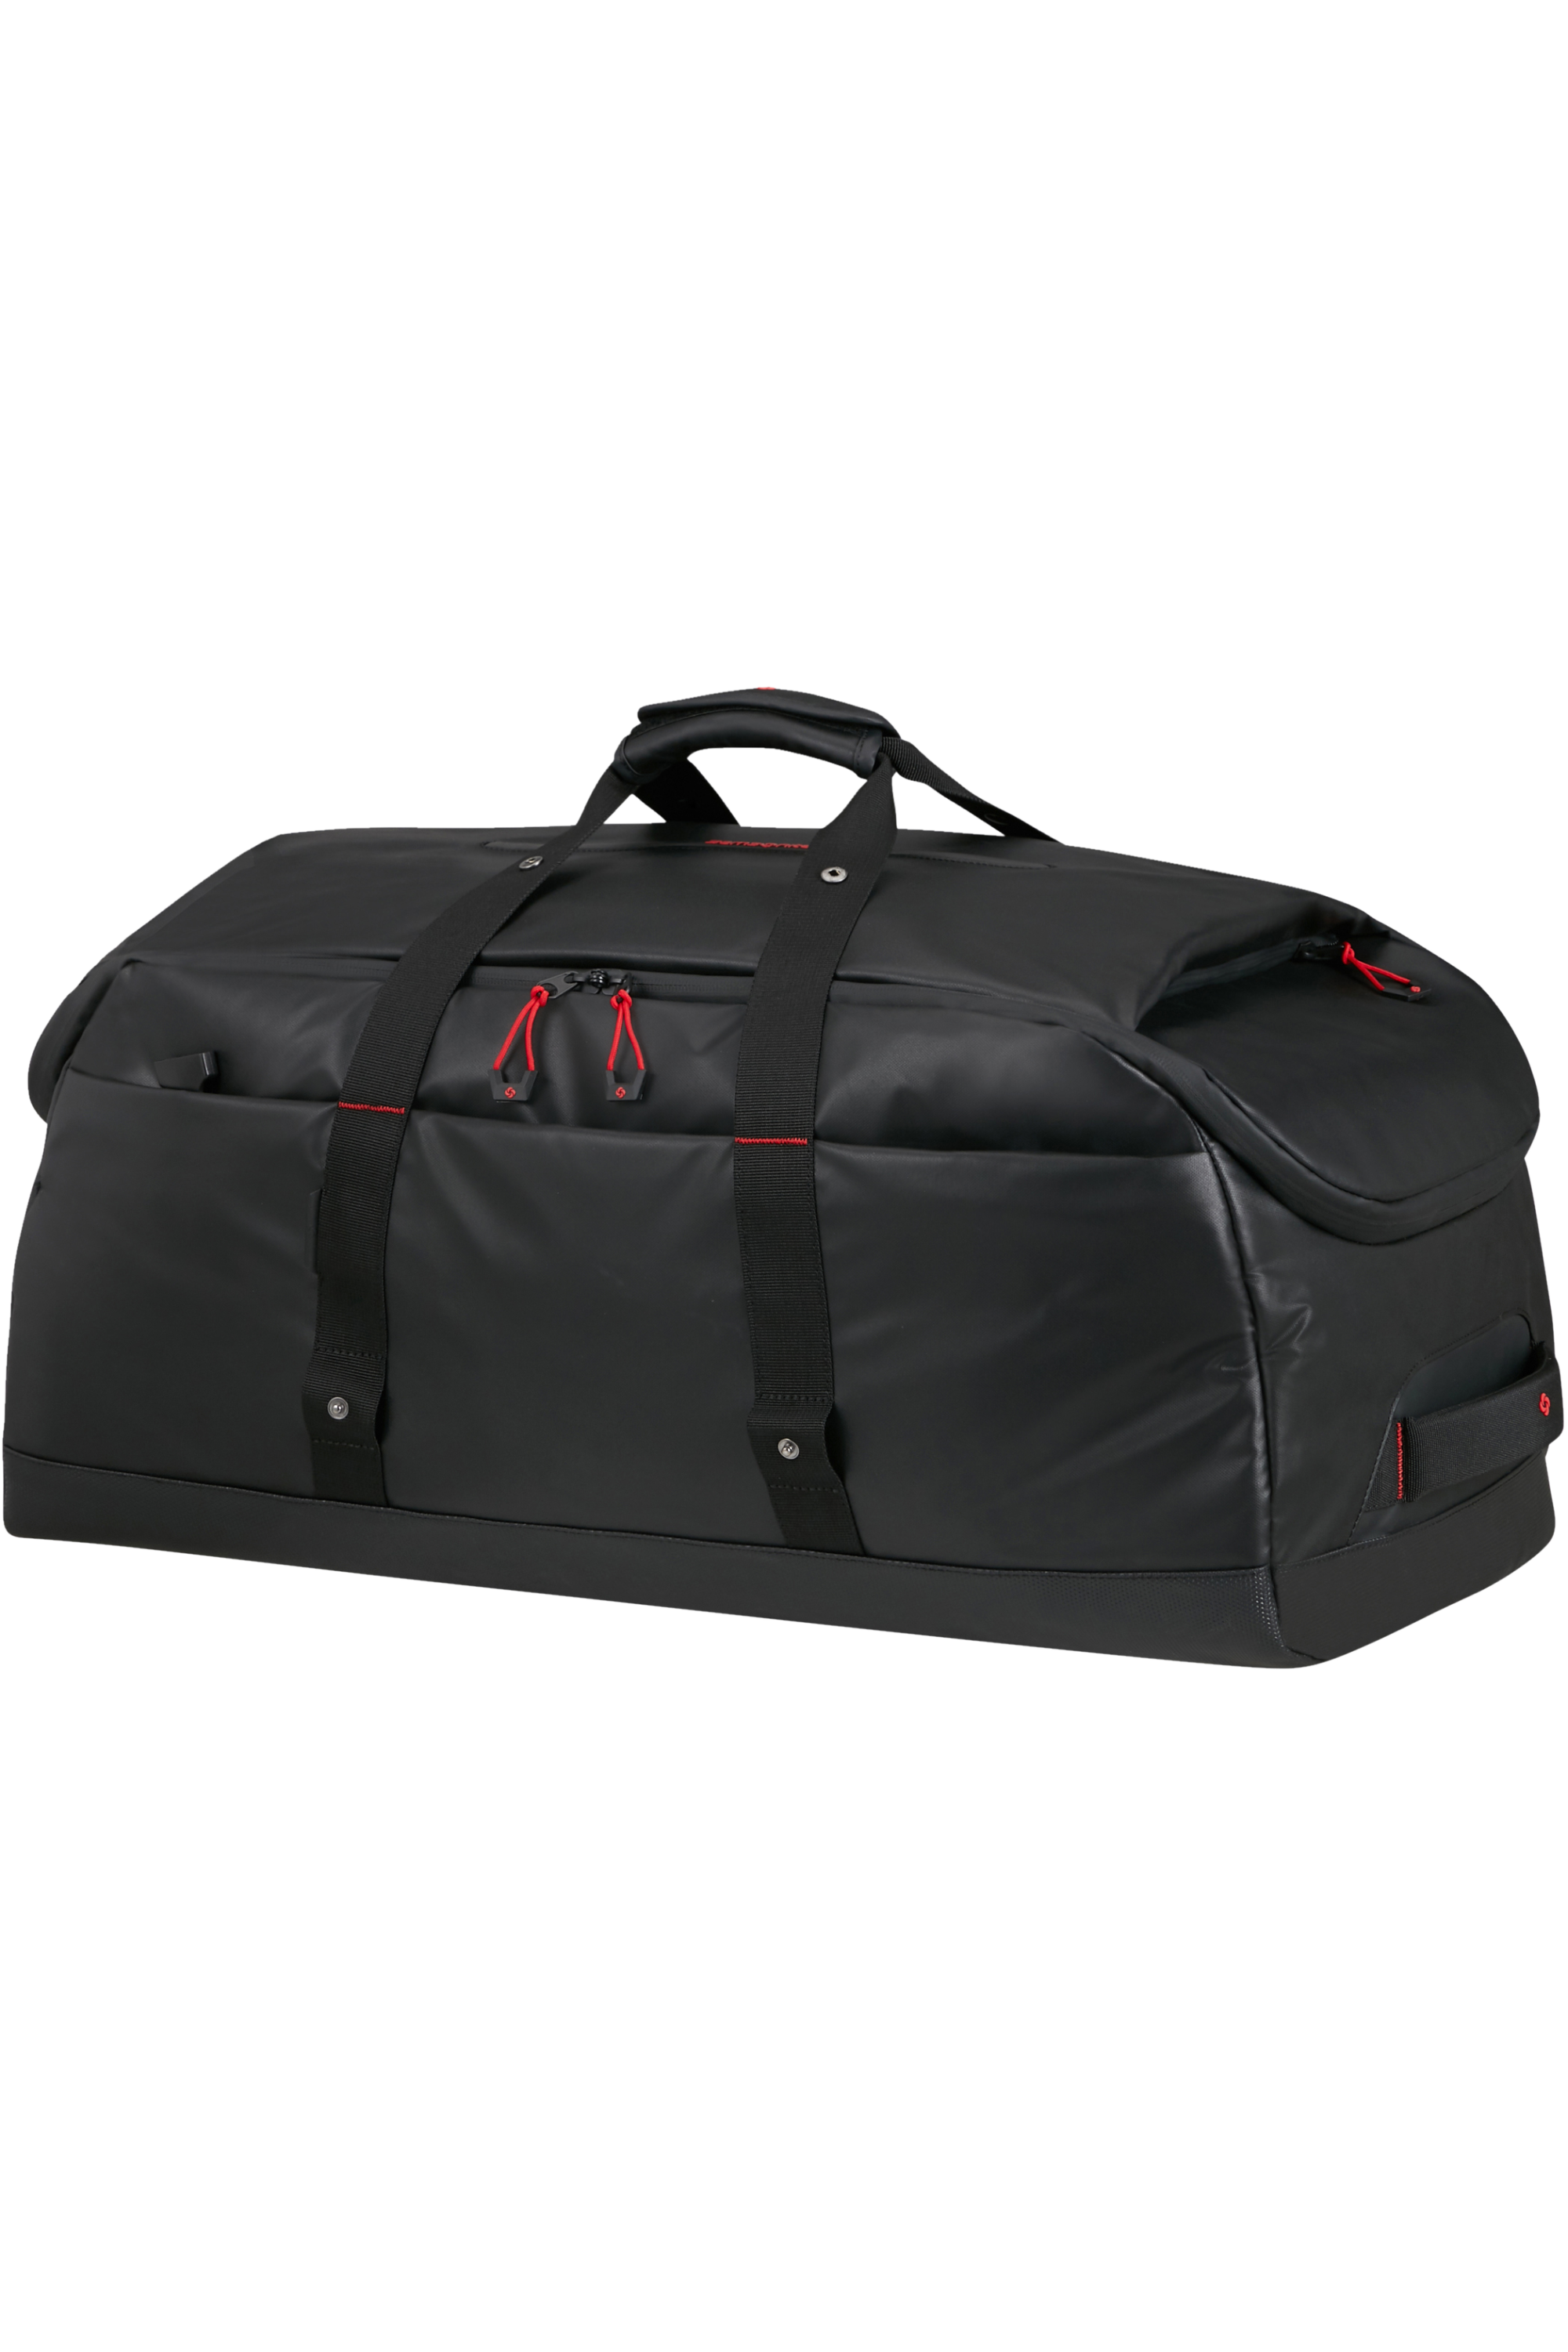 American Tourister XBag Casual2 65 Duffle Bag Red in Varanasi at best  price by Samsonite South Asia Pvt Ltd  Justdial